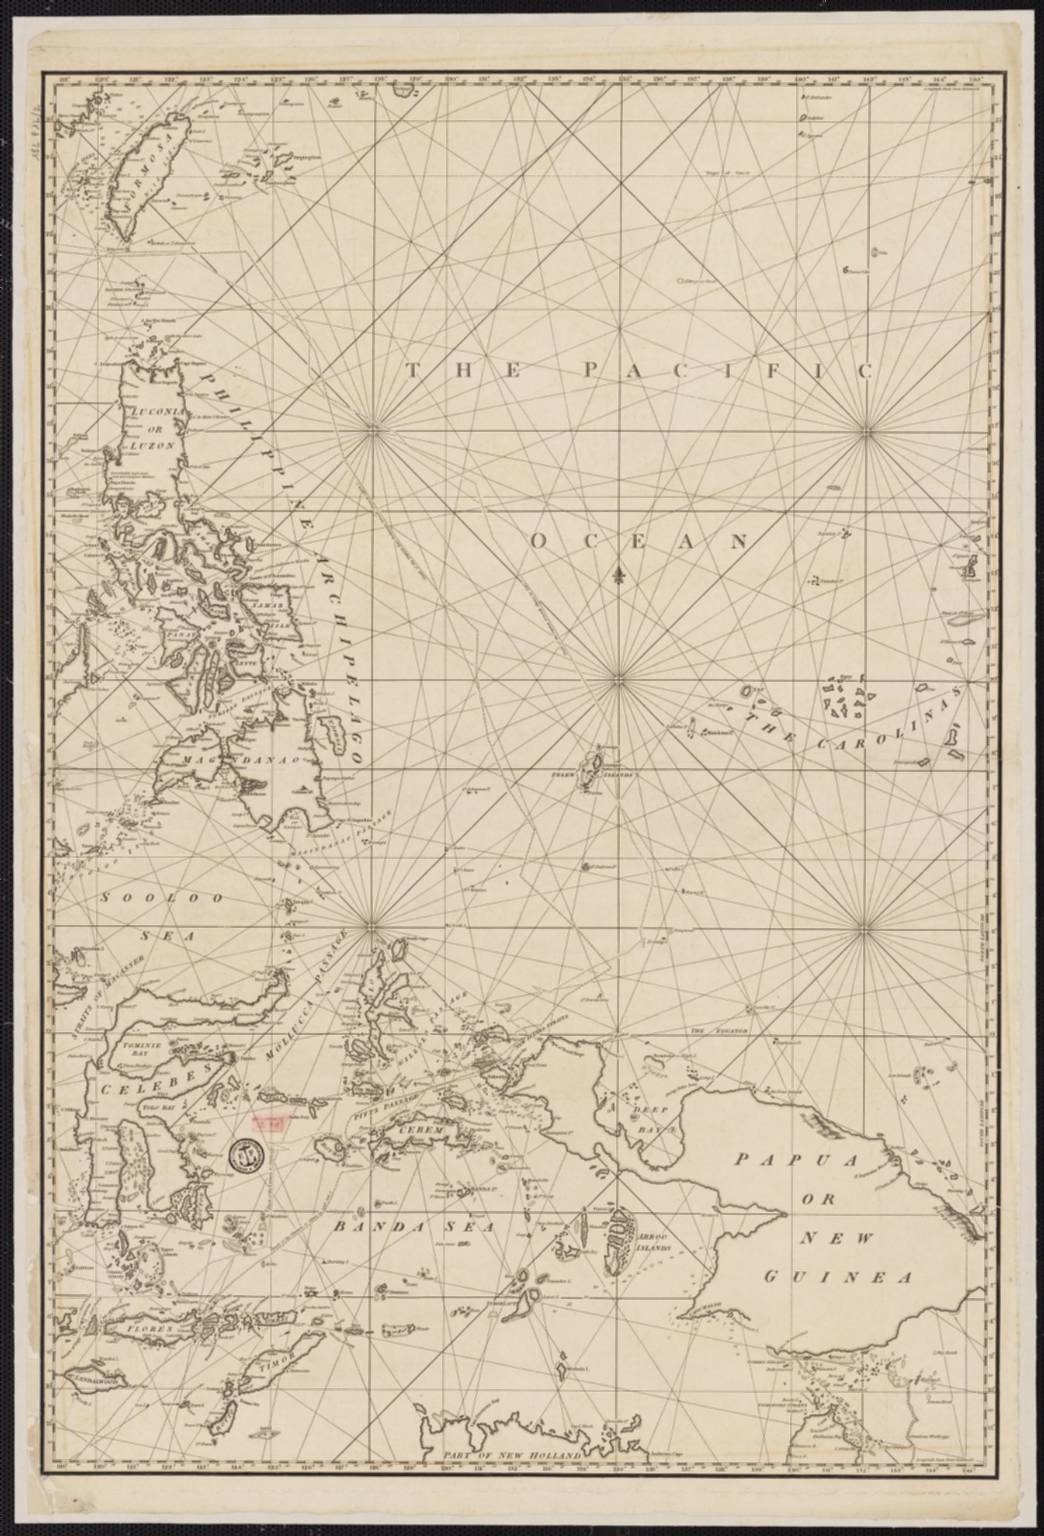 To the Honorable the Court of Directors of the United Company of Merchants of England trading to the East Indies, this Chart of the China Seas